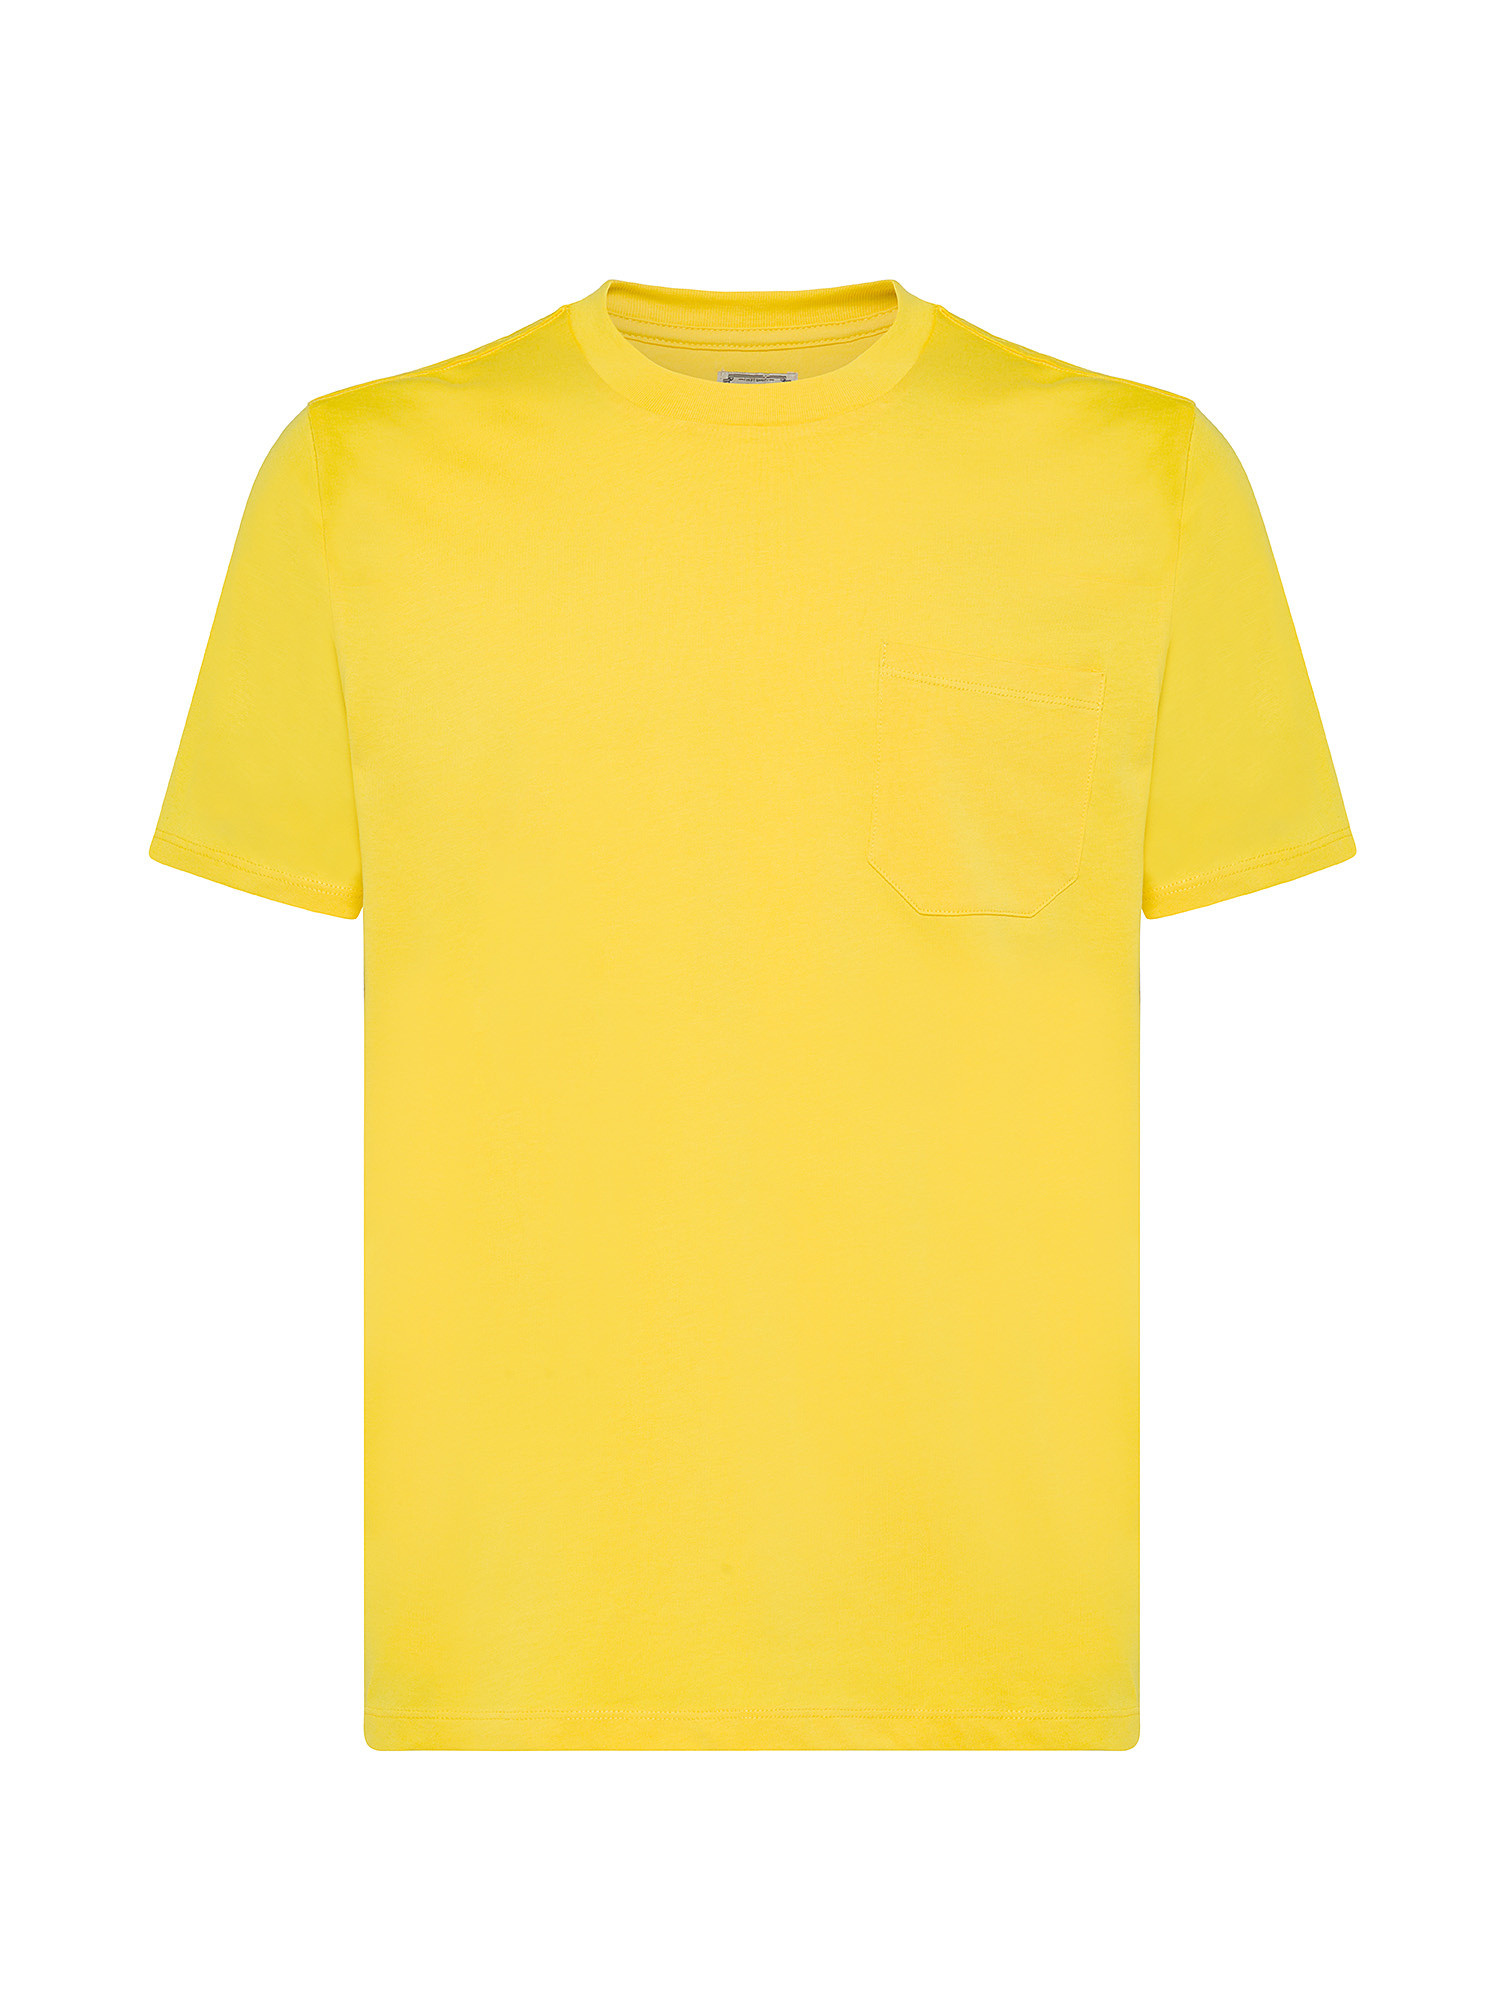 JCT - T-shirt in puro cotone supima, Giallo limone, large image number 0